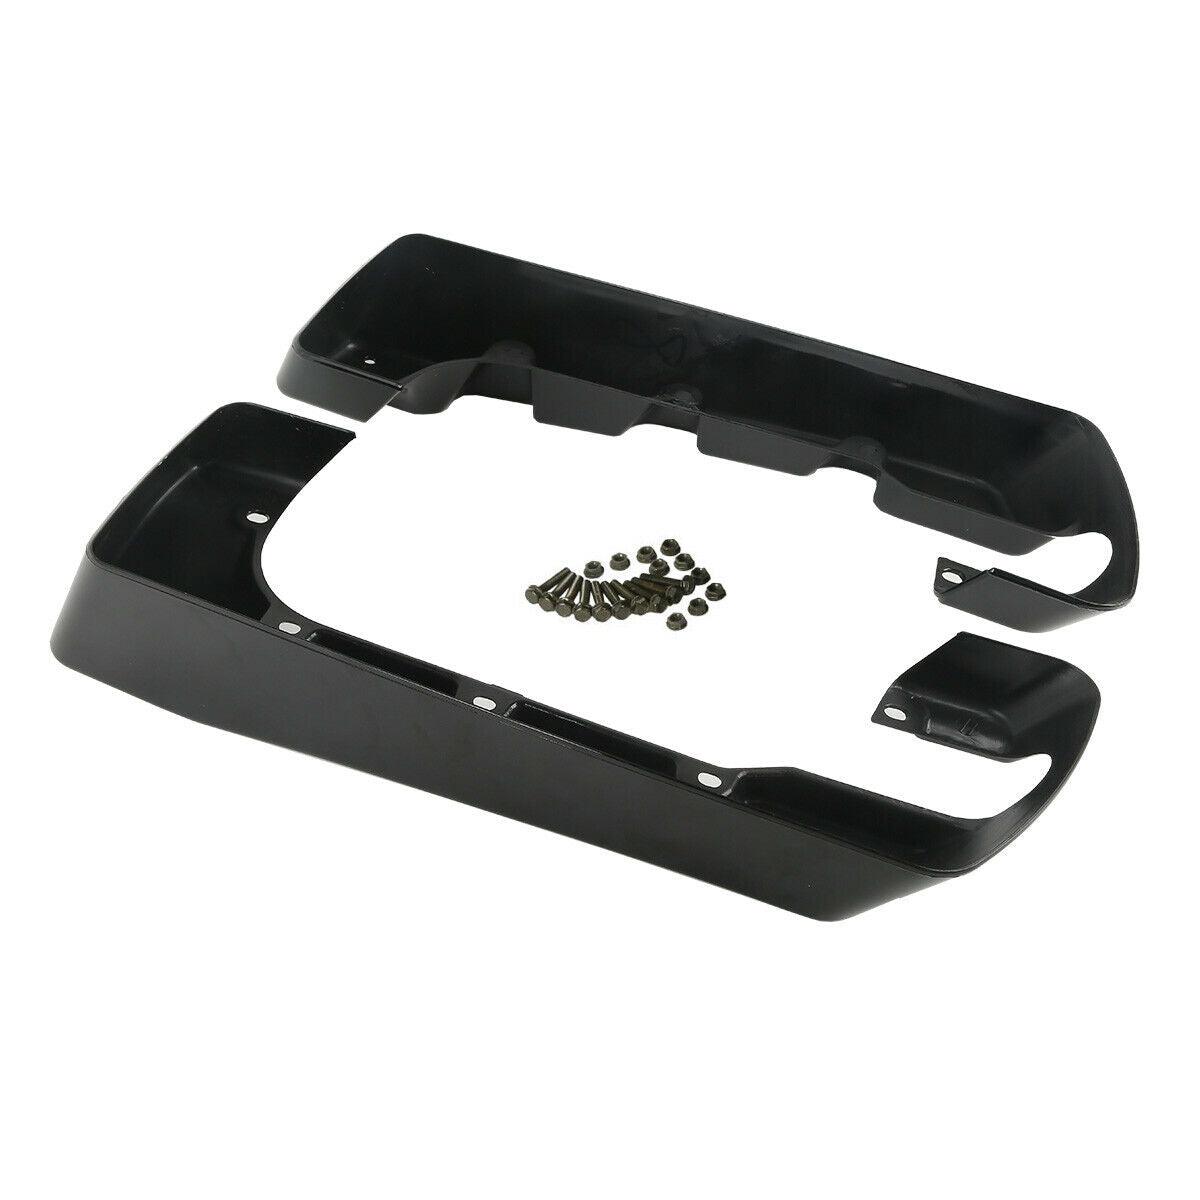 4" Hard Stretched Saddle Bag Extensions Fit For Harley Touring Road King 2014-Up - Moto Life Products